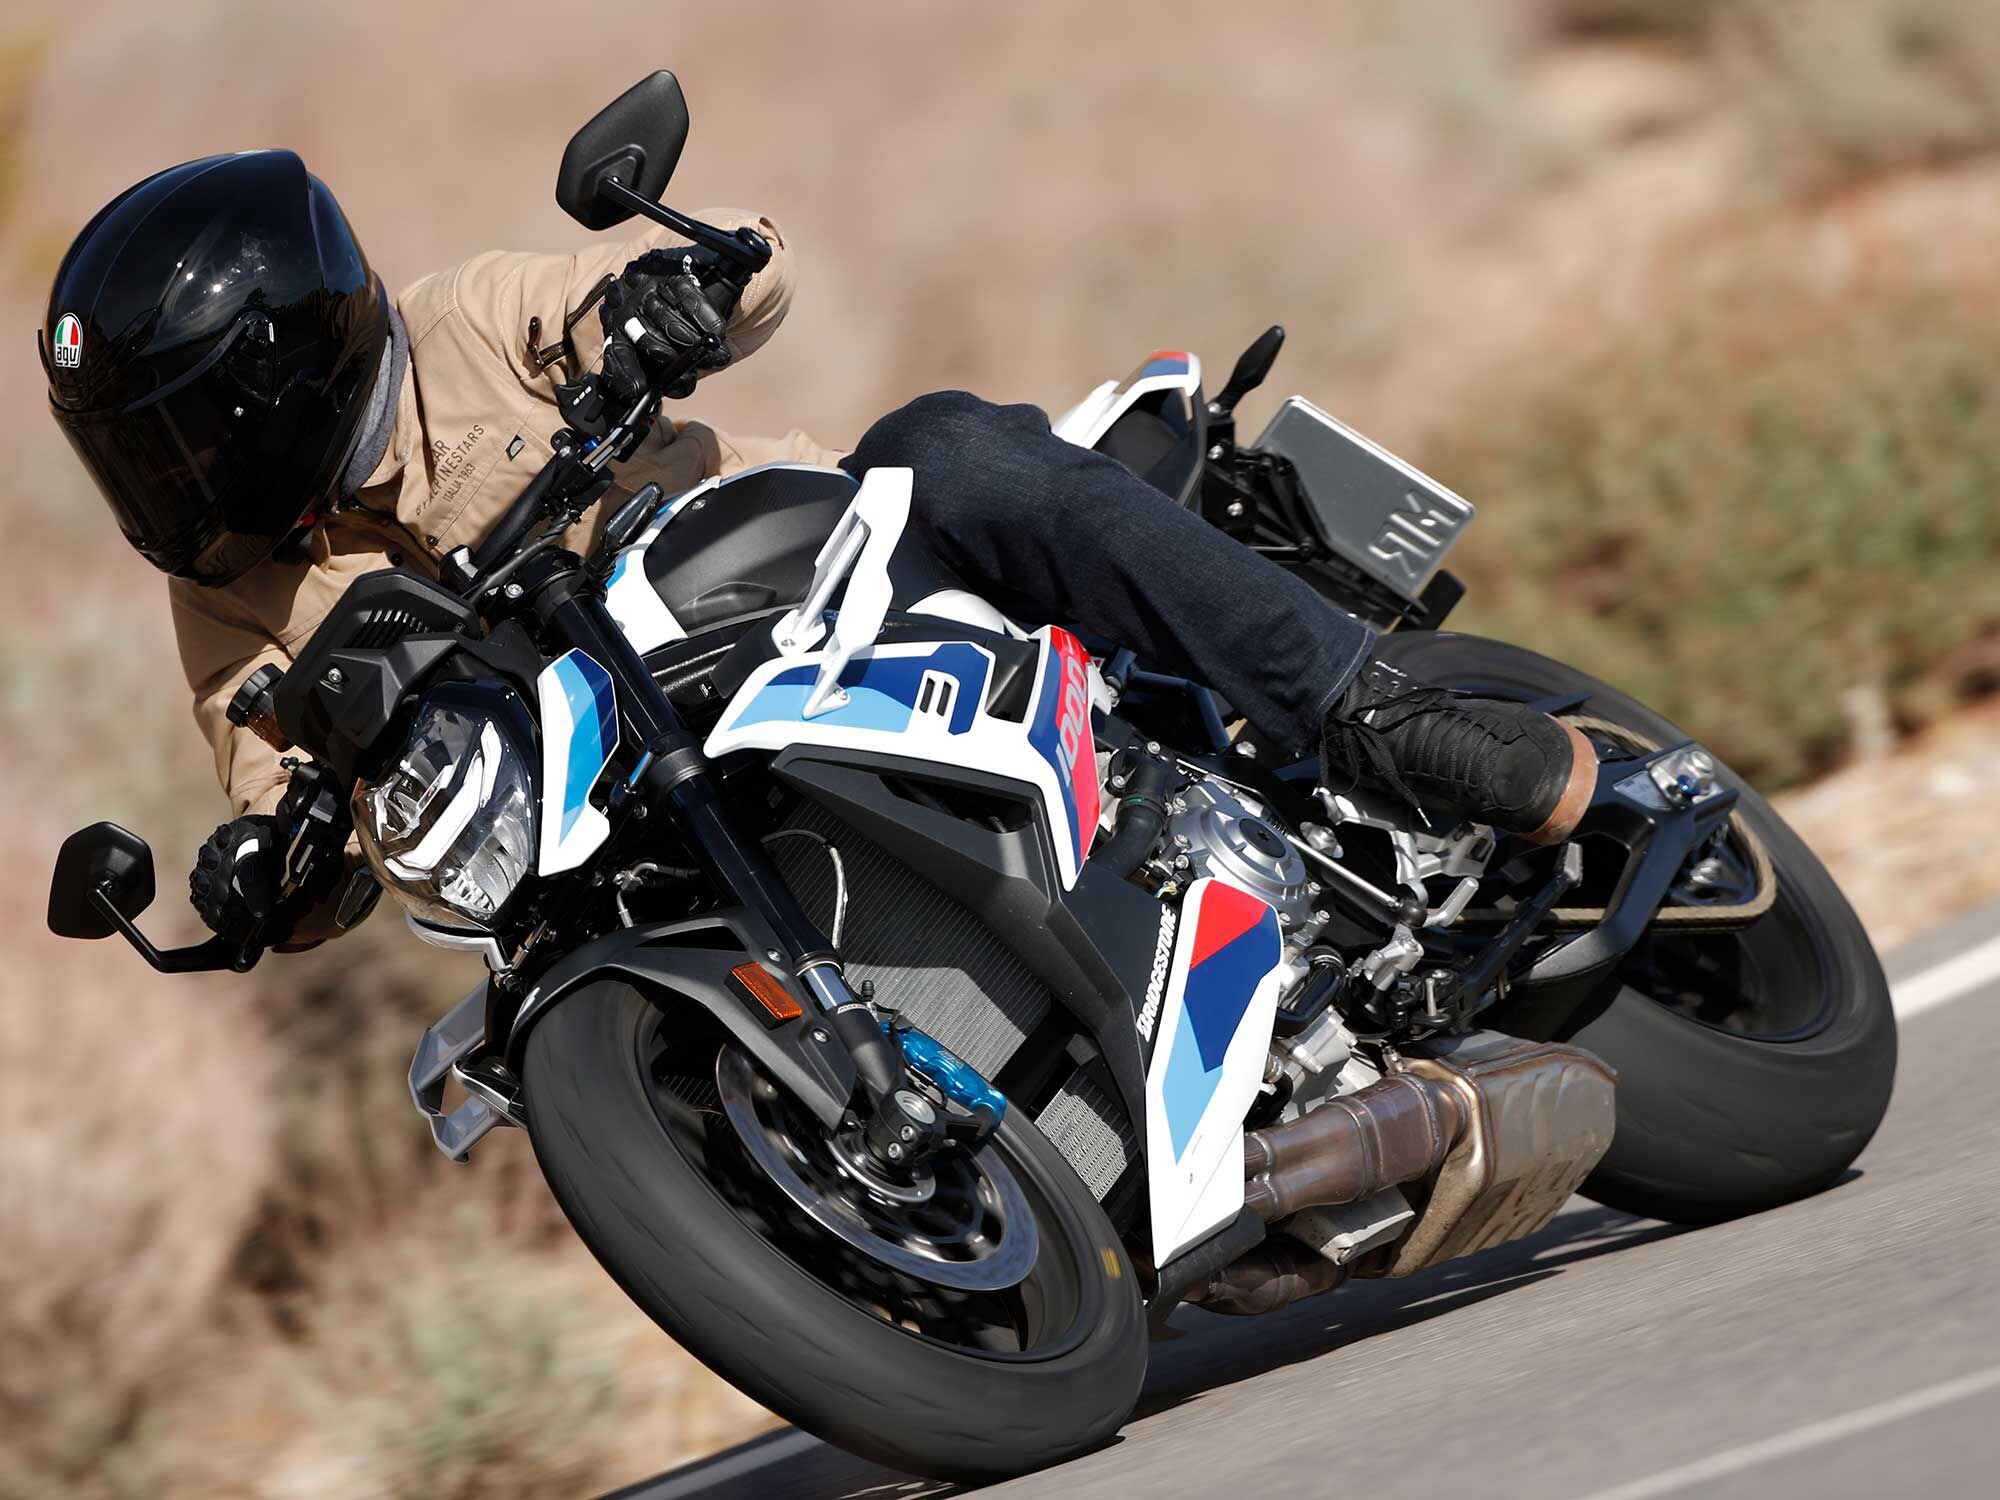 The M 1000 R is easily the most potent naked roadster BMW has ever built.